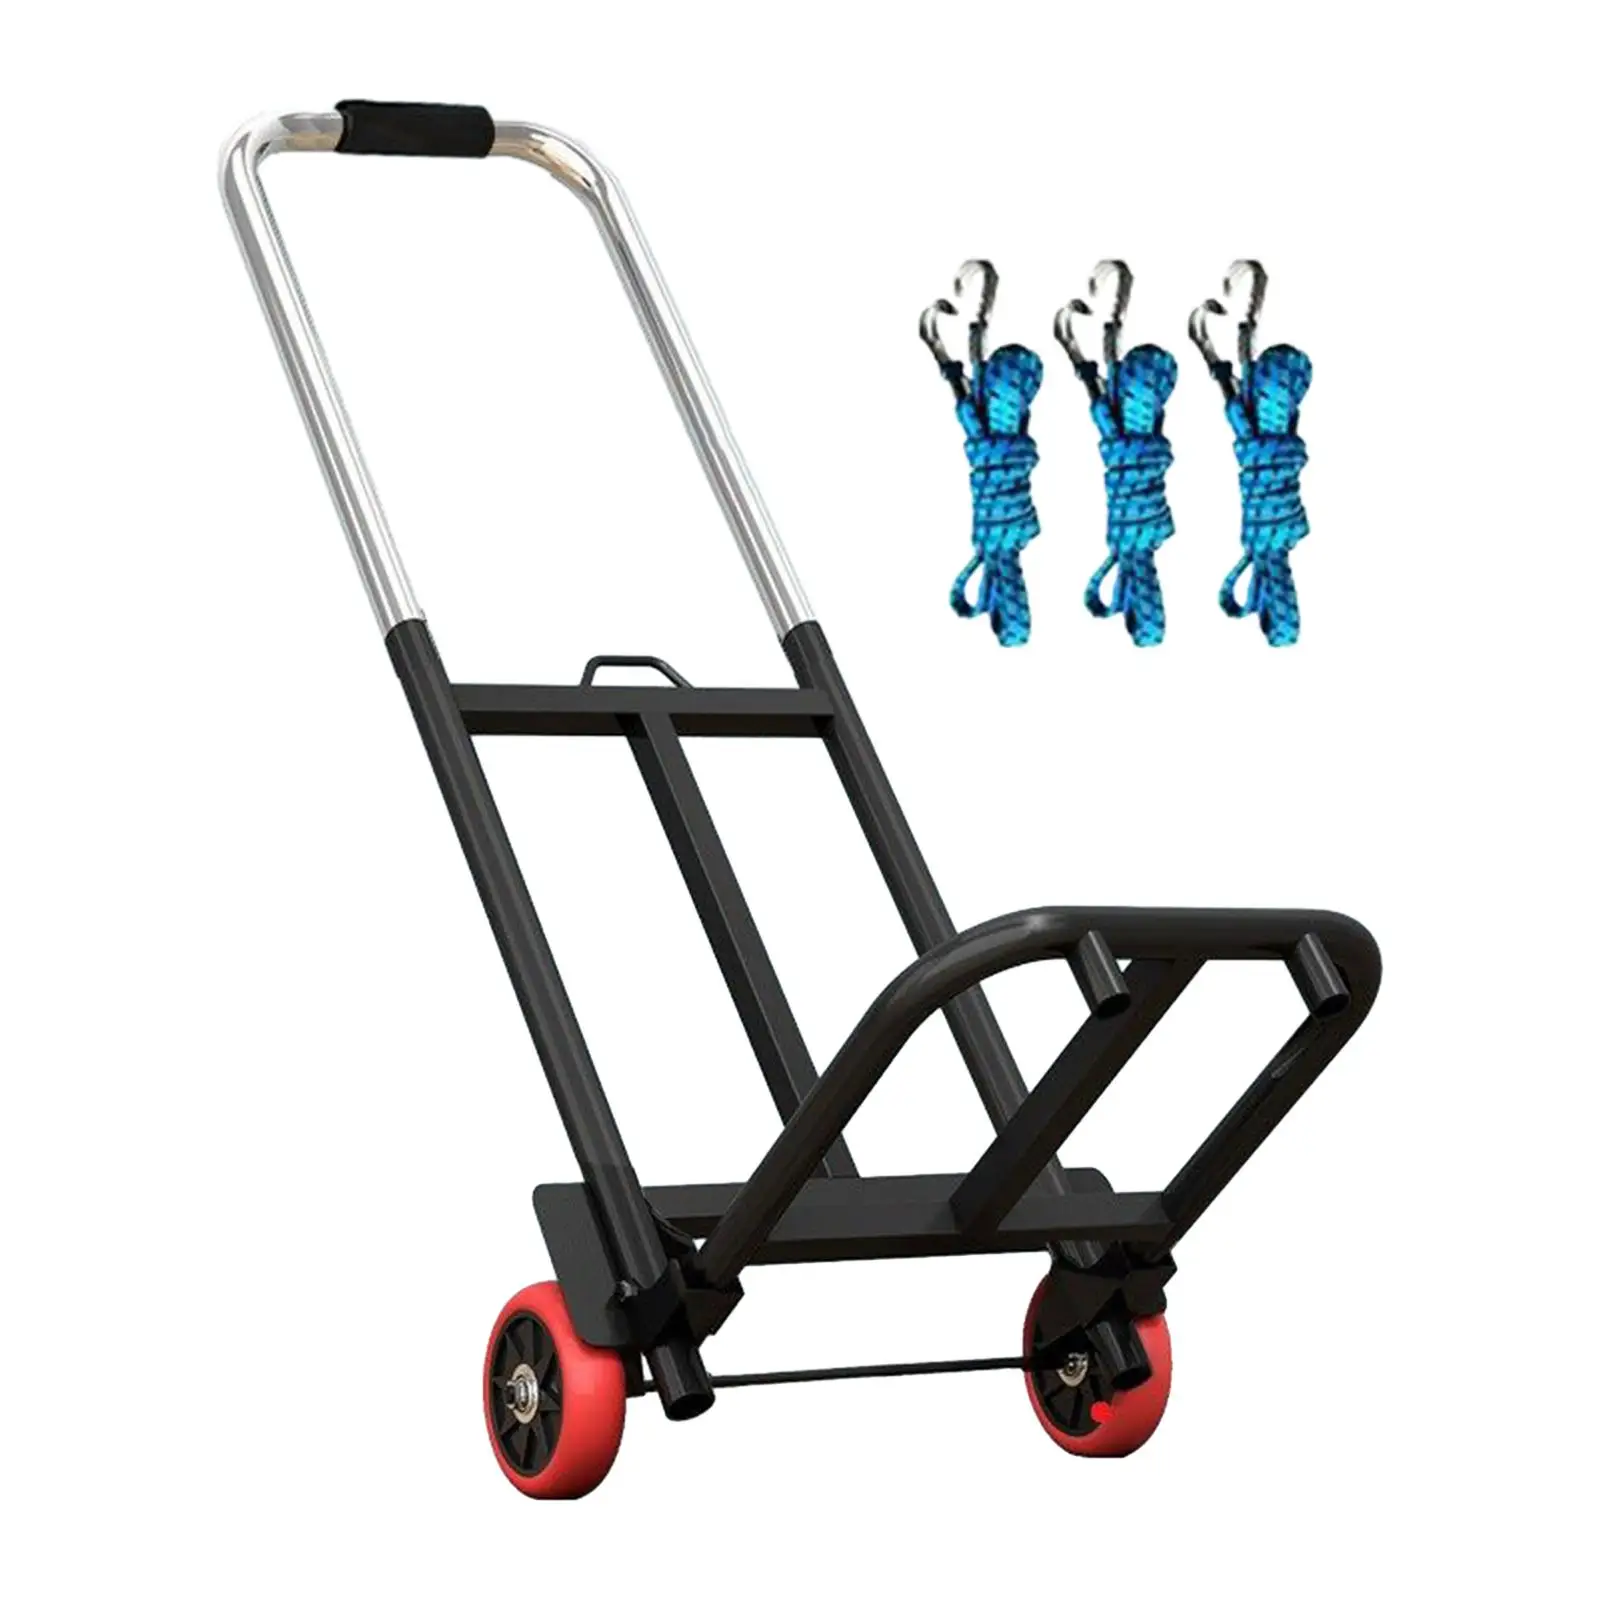 Folding Hand Truck Luggage Trolley Cart Shopping Cart for Personal Travel